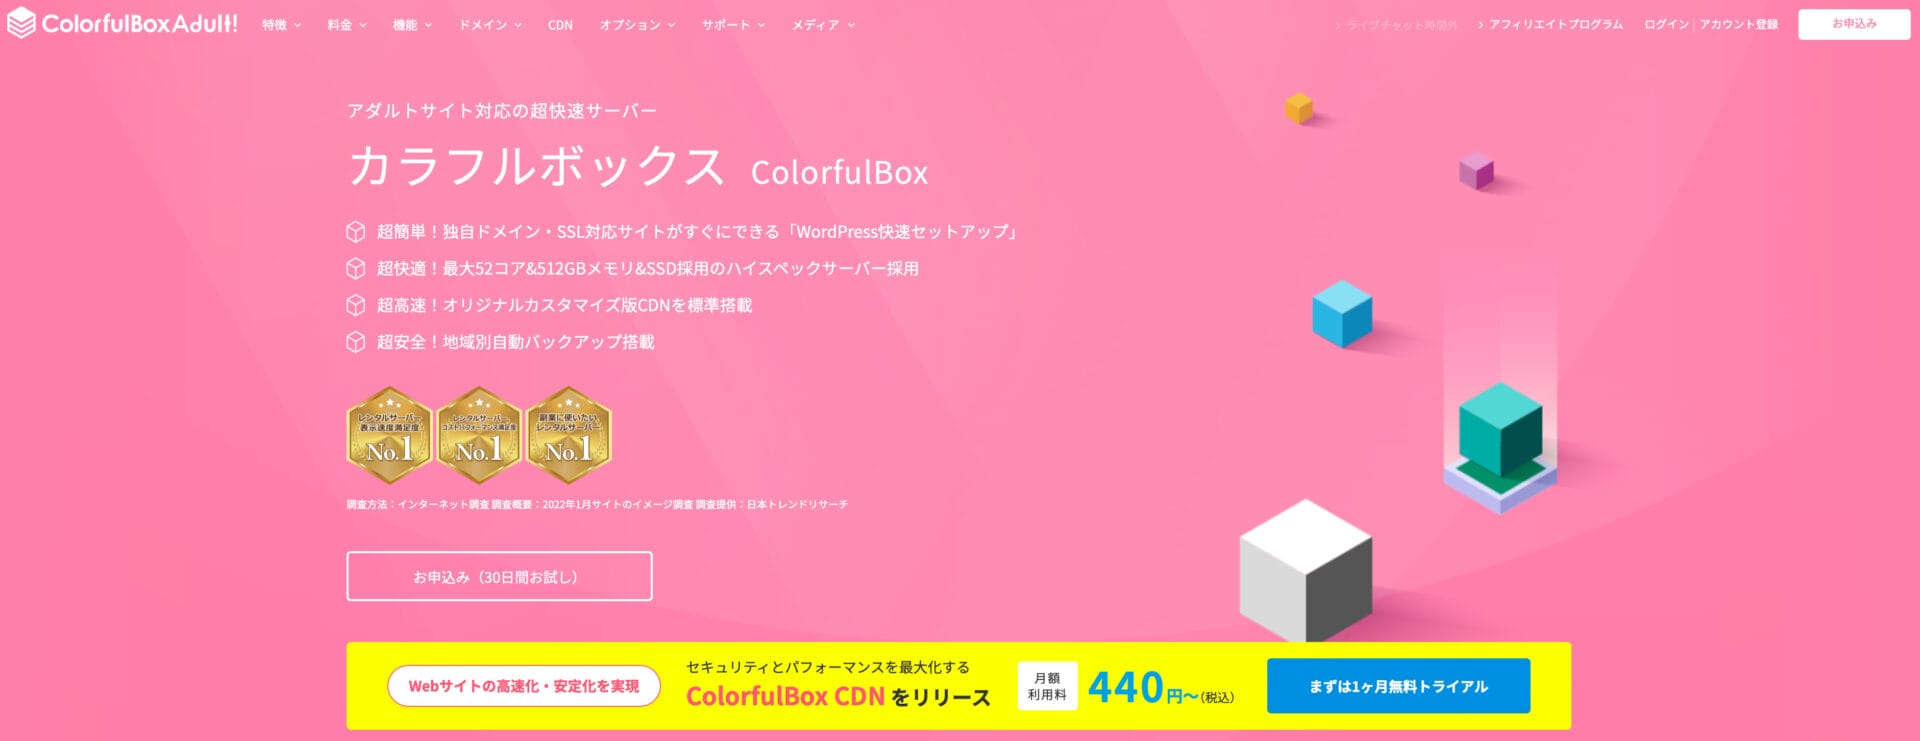 colorfulbox adult